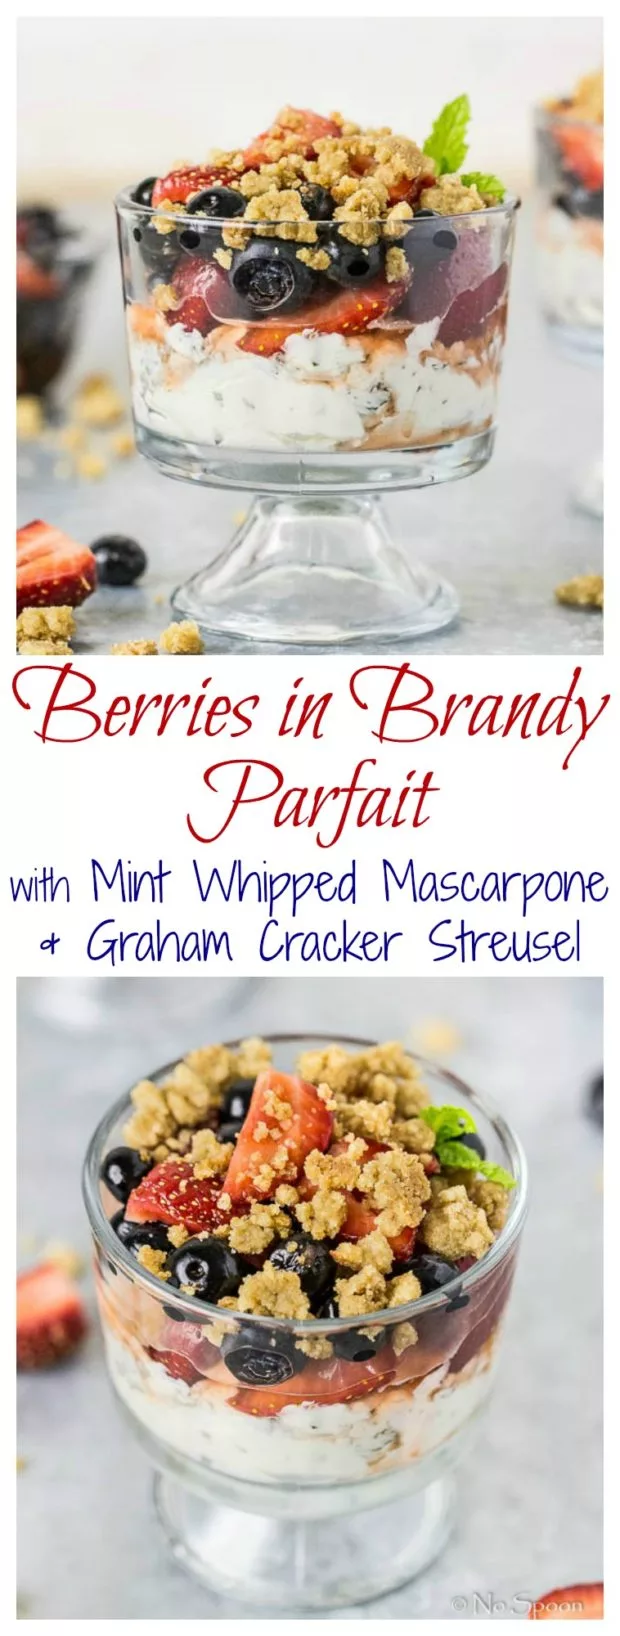 Berries in Brandy Parfait with Whipped Mascarpone & Graham Cracker Streusel- long pin1